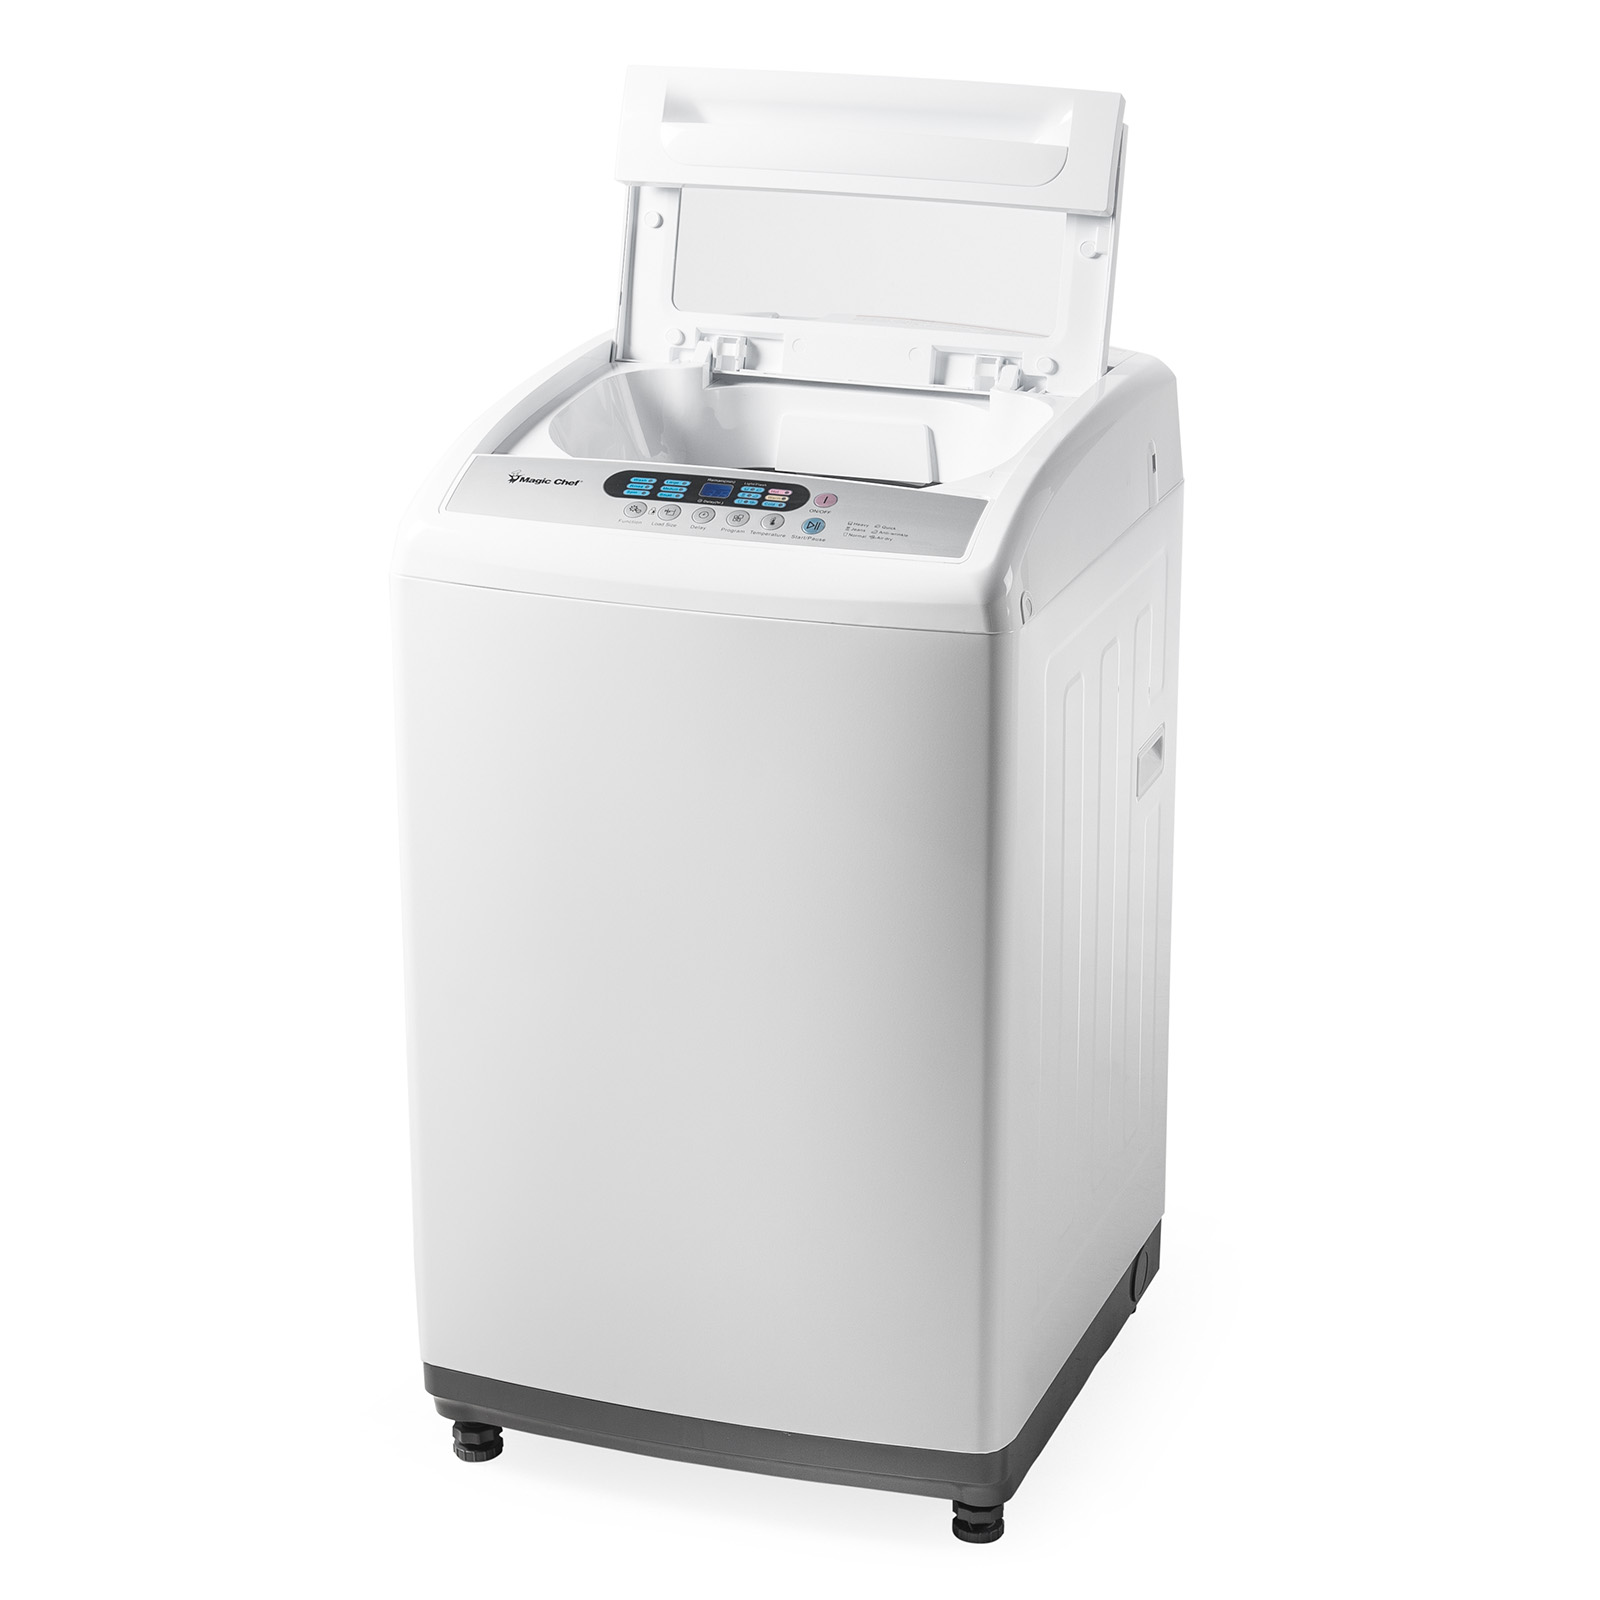 Magic Chef 2.1 cu ft Topload Compact Washer, White - image 1 of 18